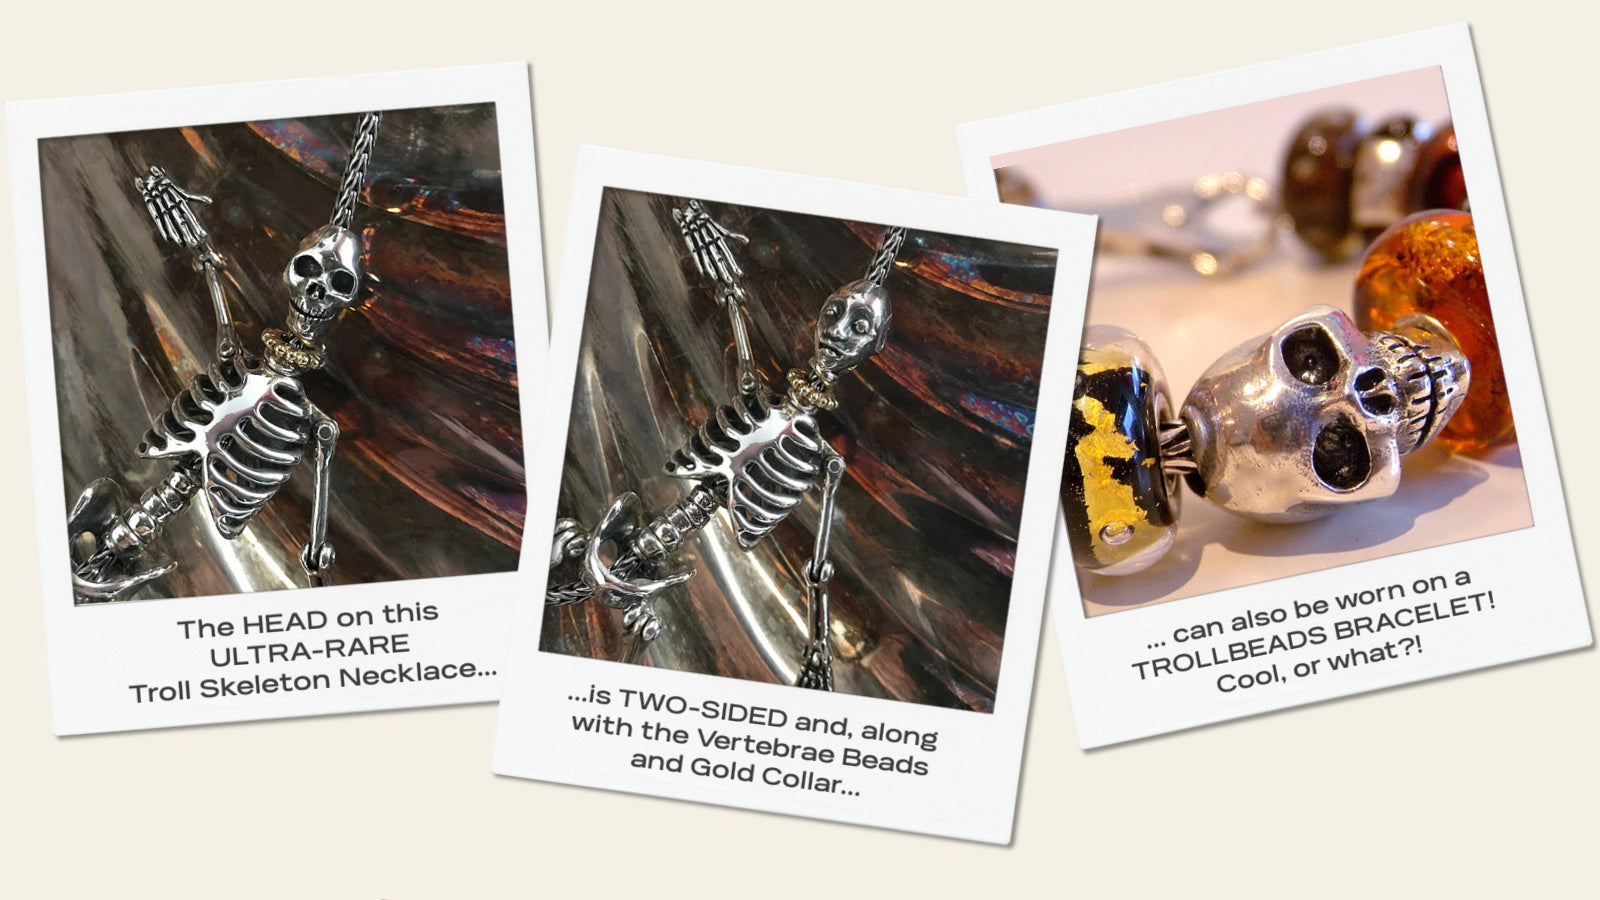 Suzie Q Studio has stashed away special glass, sterling silver and limited edition Trollbeads pieces in the Suzie Q Studio “Trollbeads Treasure Vault”. Here she talks about the ultra-rare Trollbeads Skeleton Necklace.